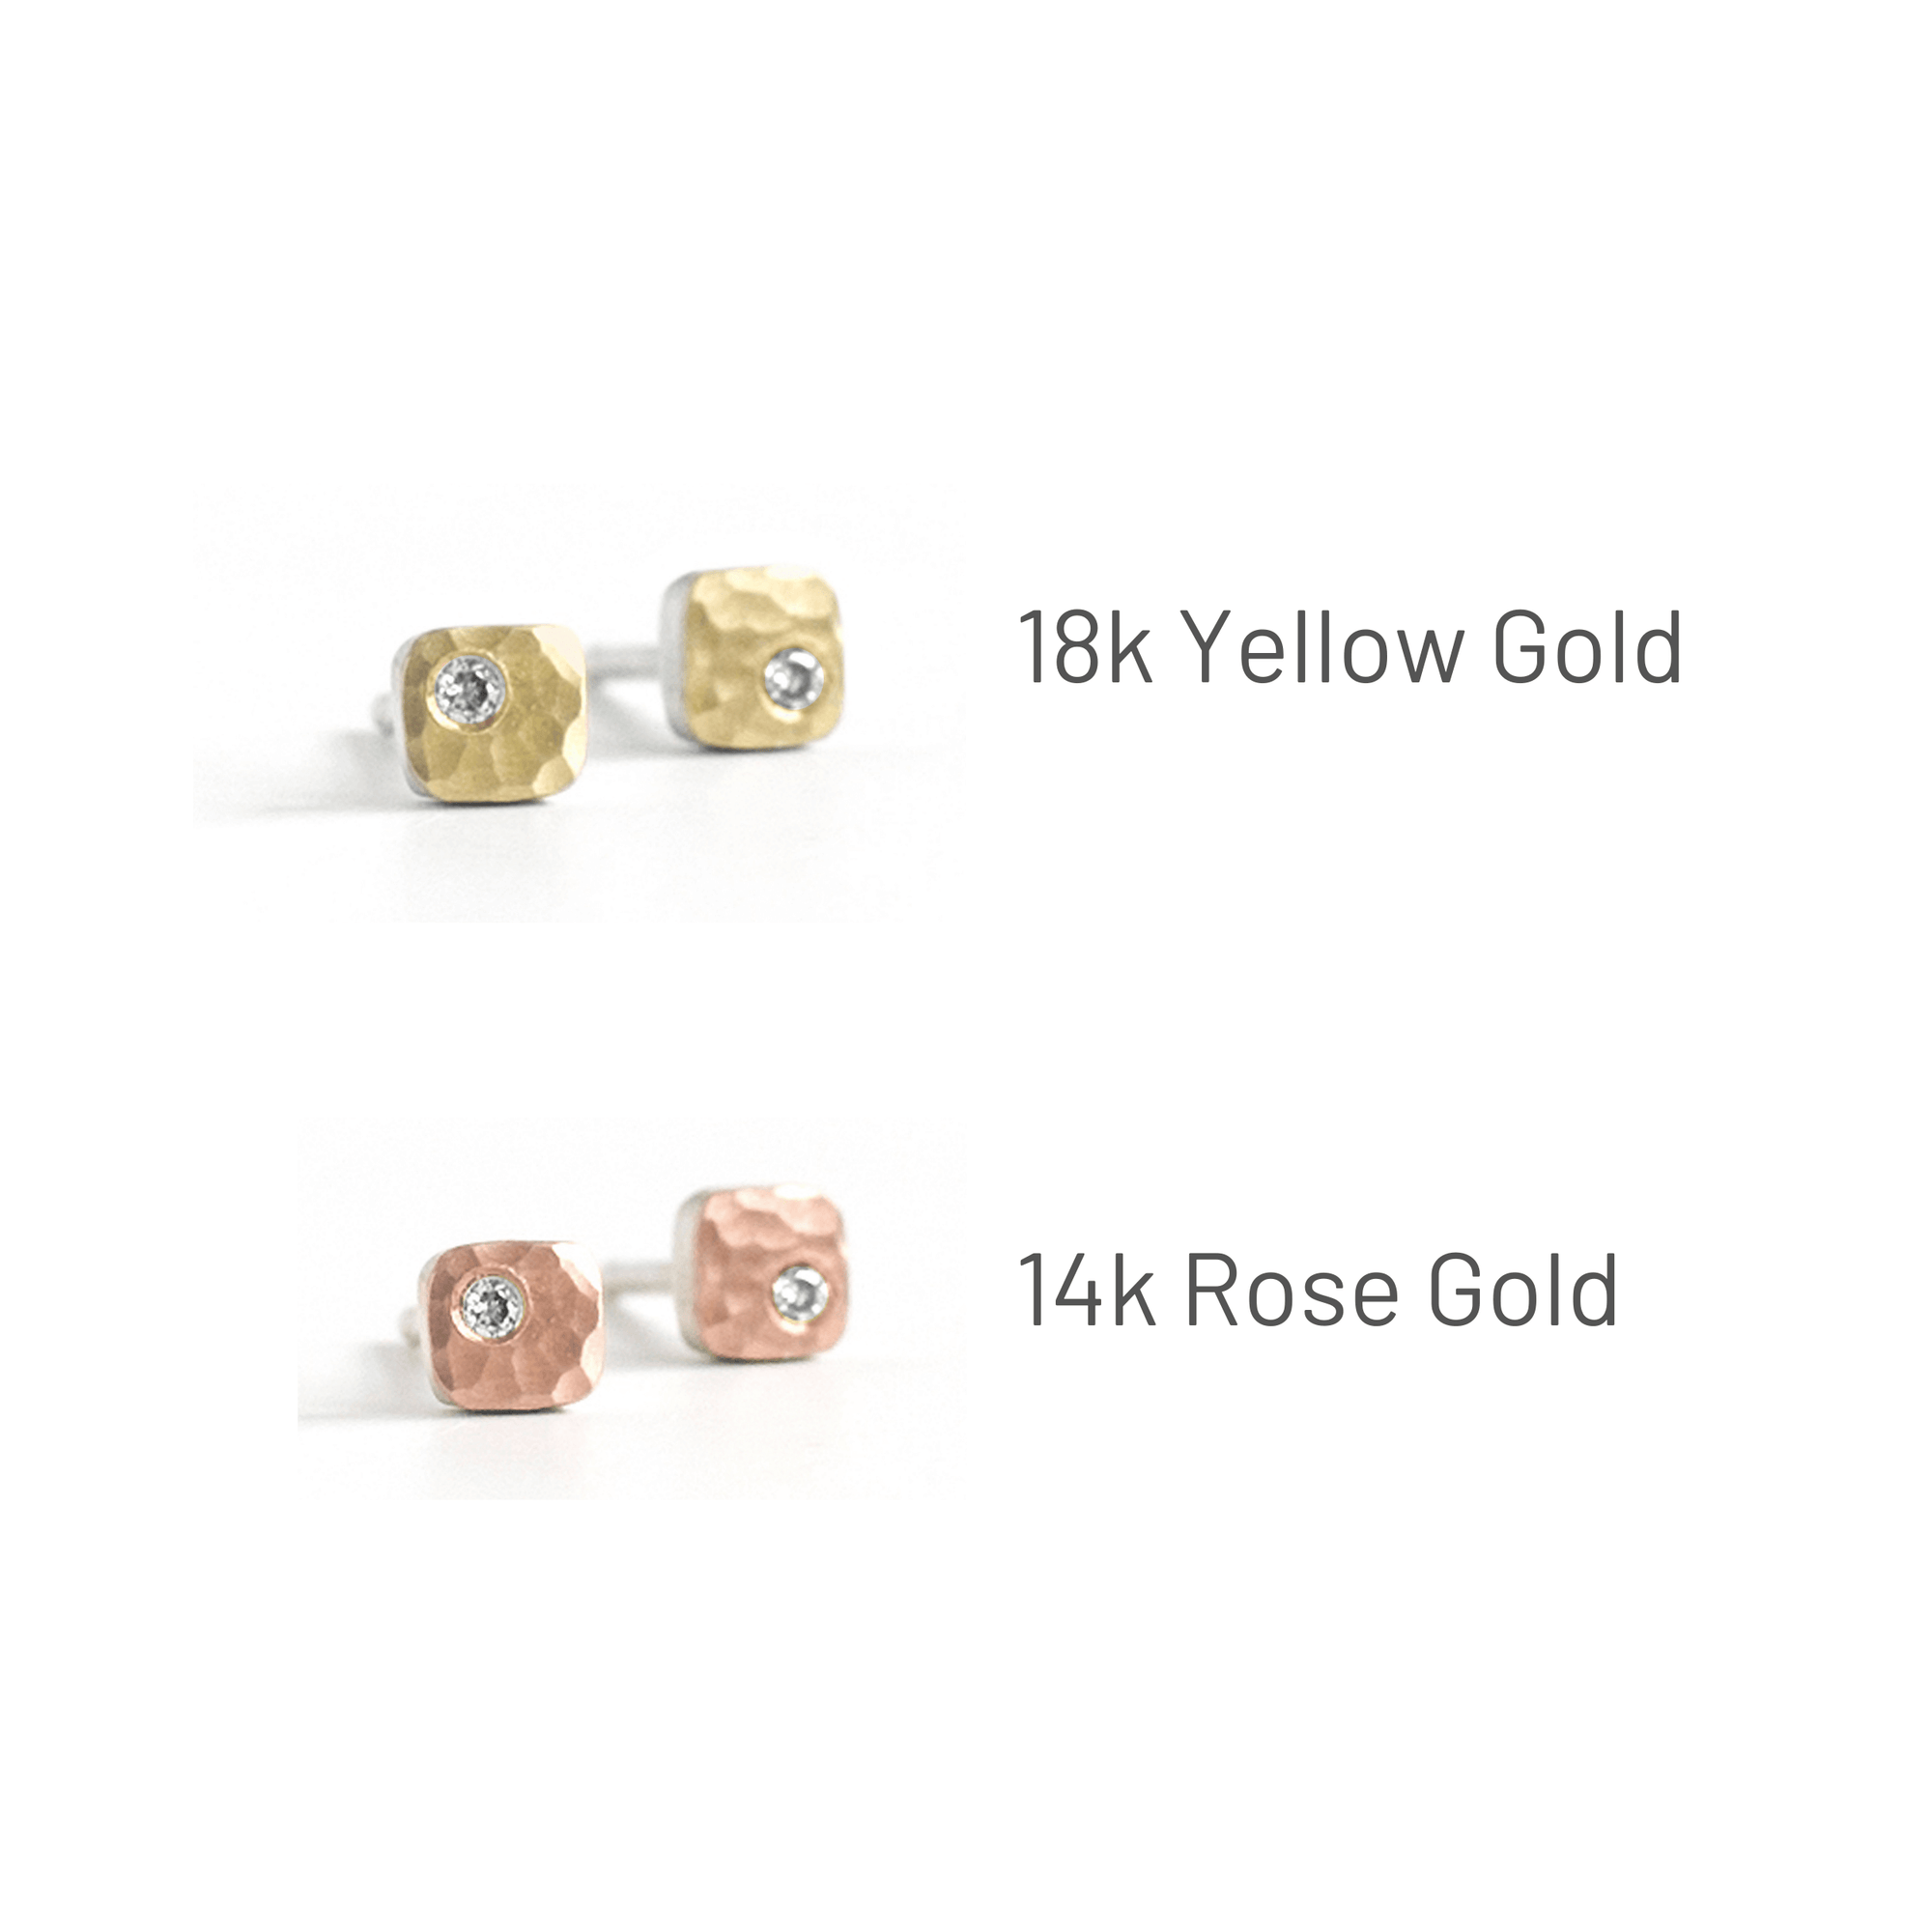 Hammered studs in gold and silver with white diamond accents.